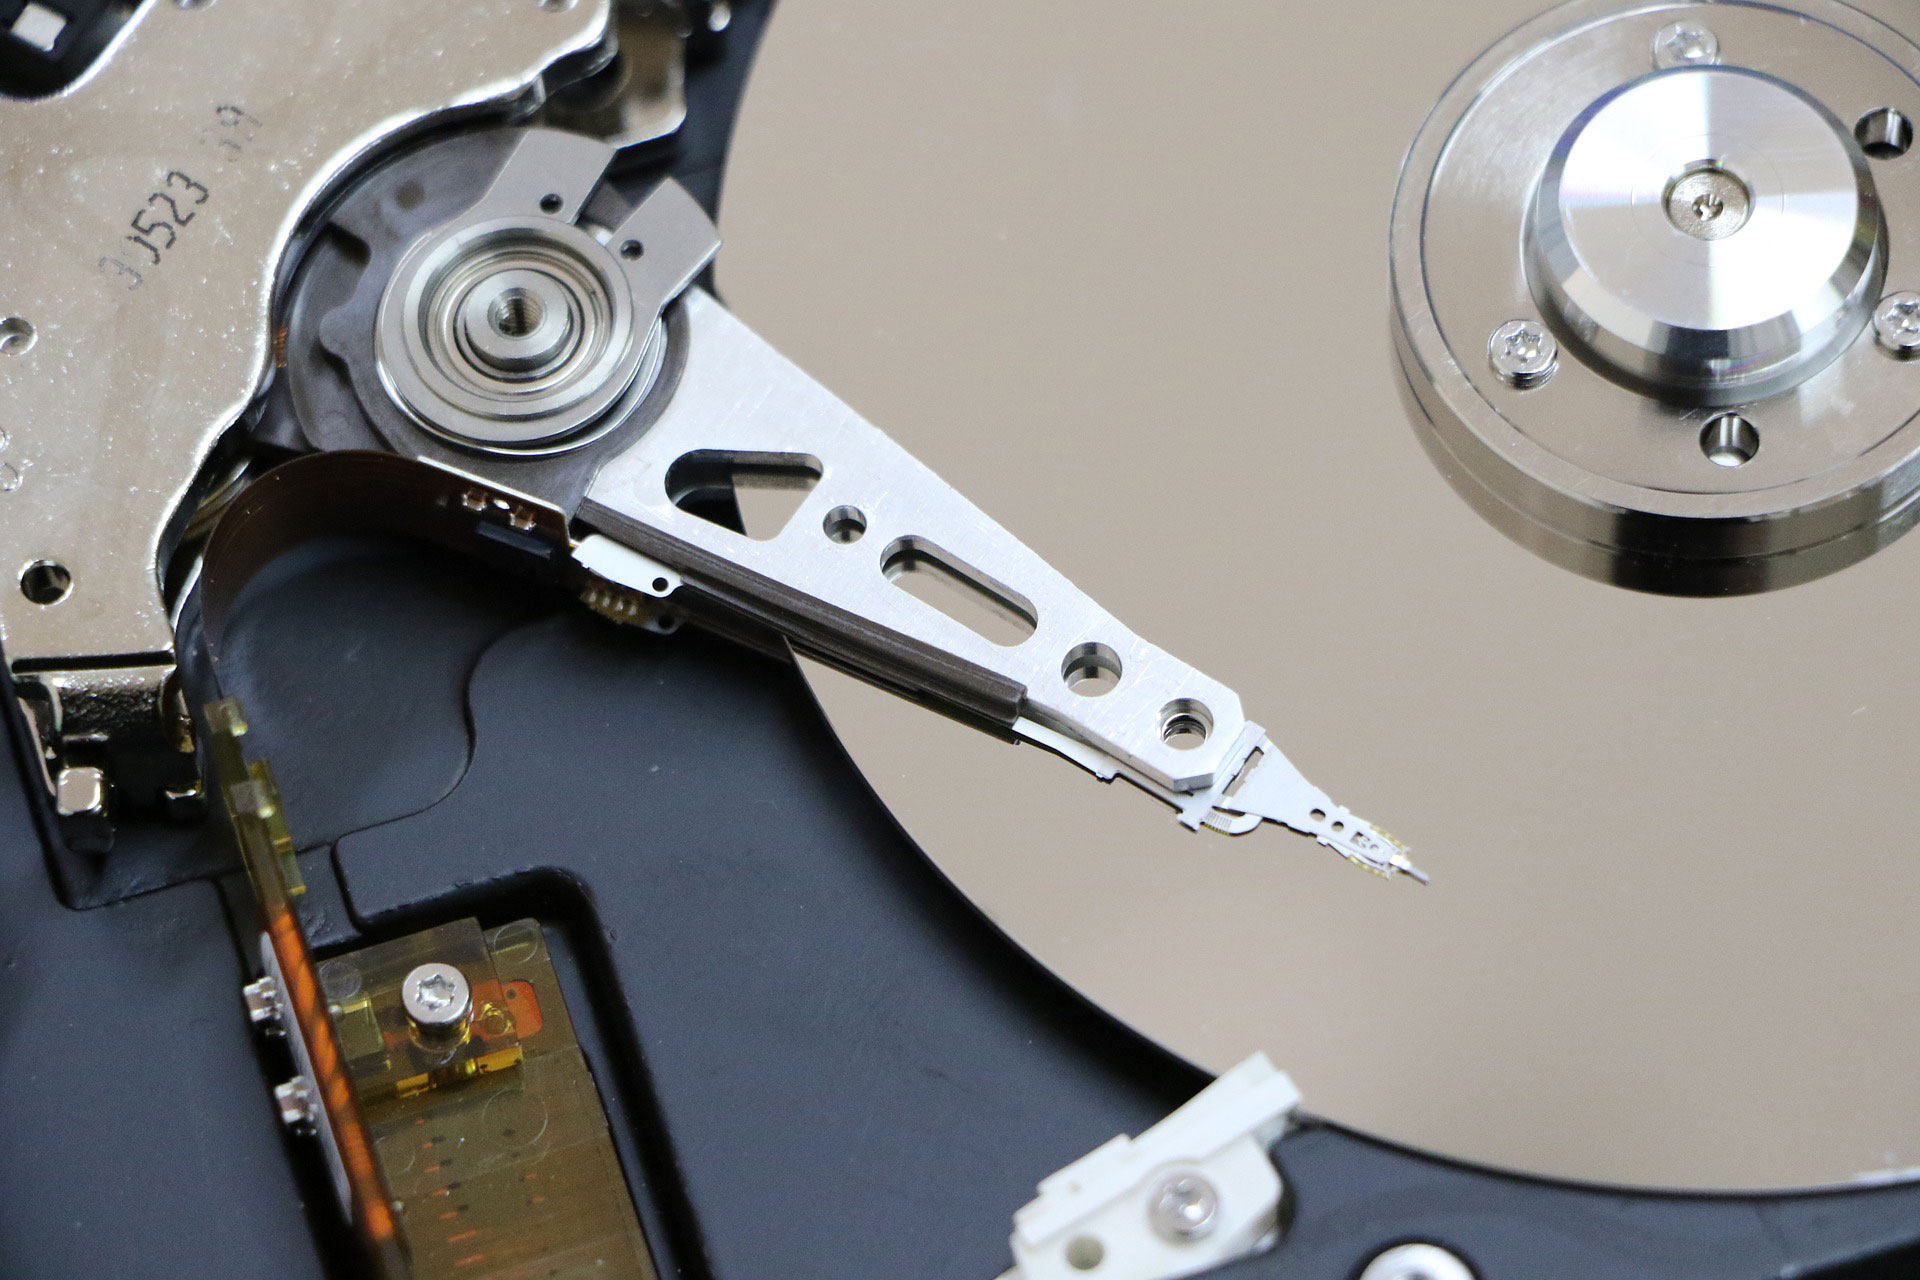 how to reformat external drive on pc